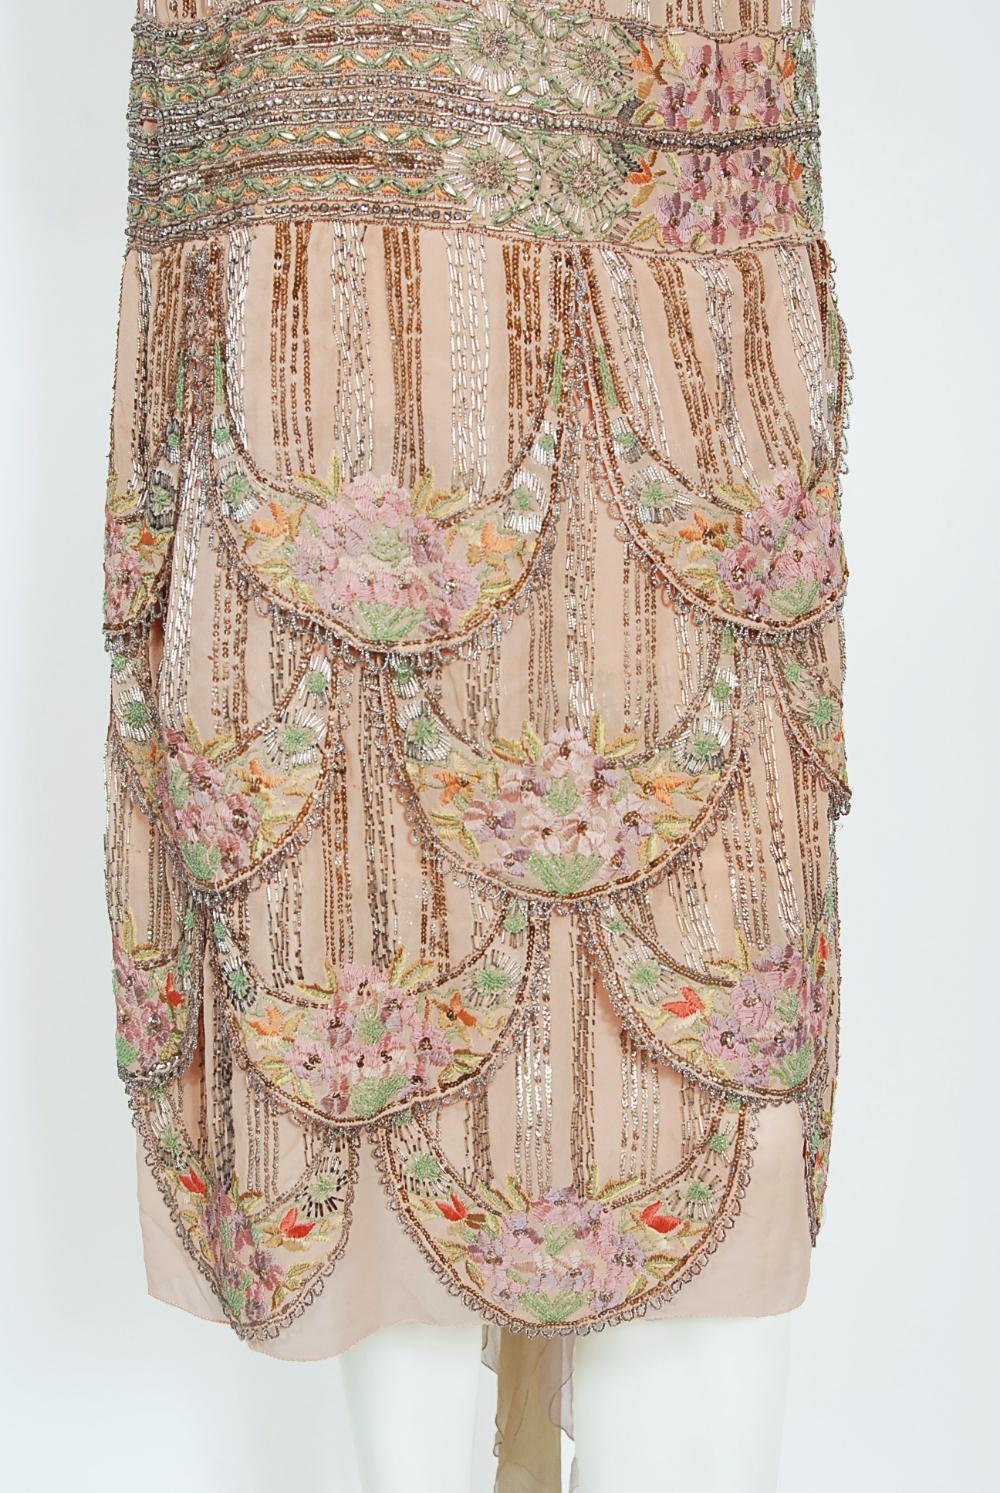 Women's 1920s French Couture Beaded Embroidered Blush-Pink Silk Petal Deco Flapper Dress For Sale